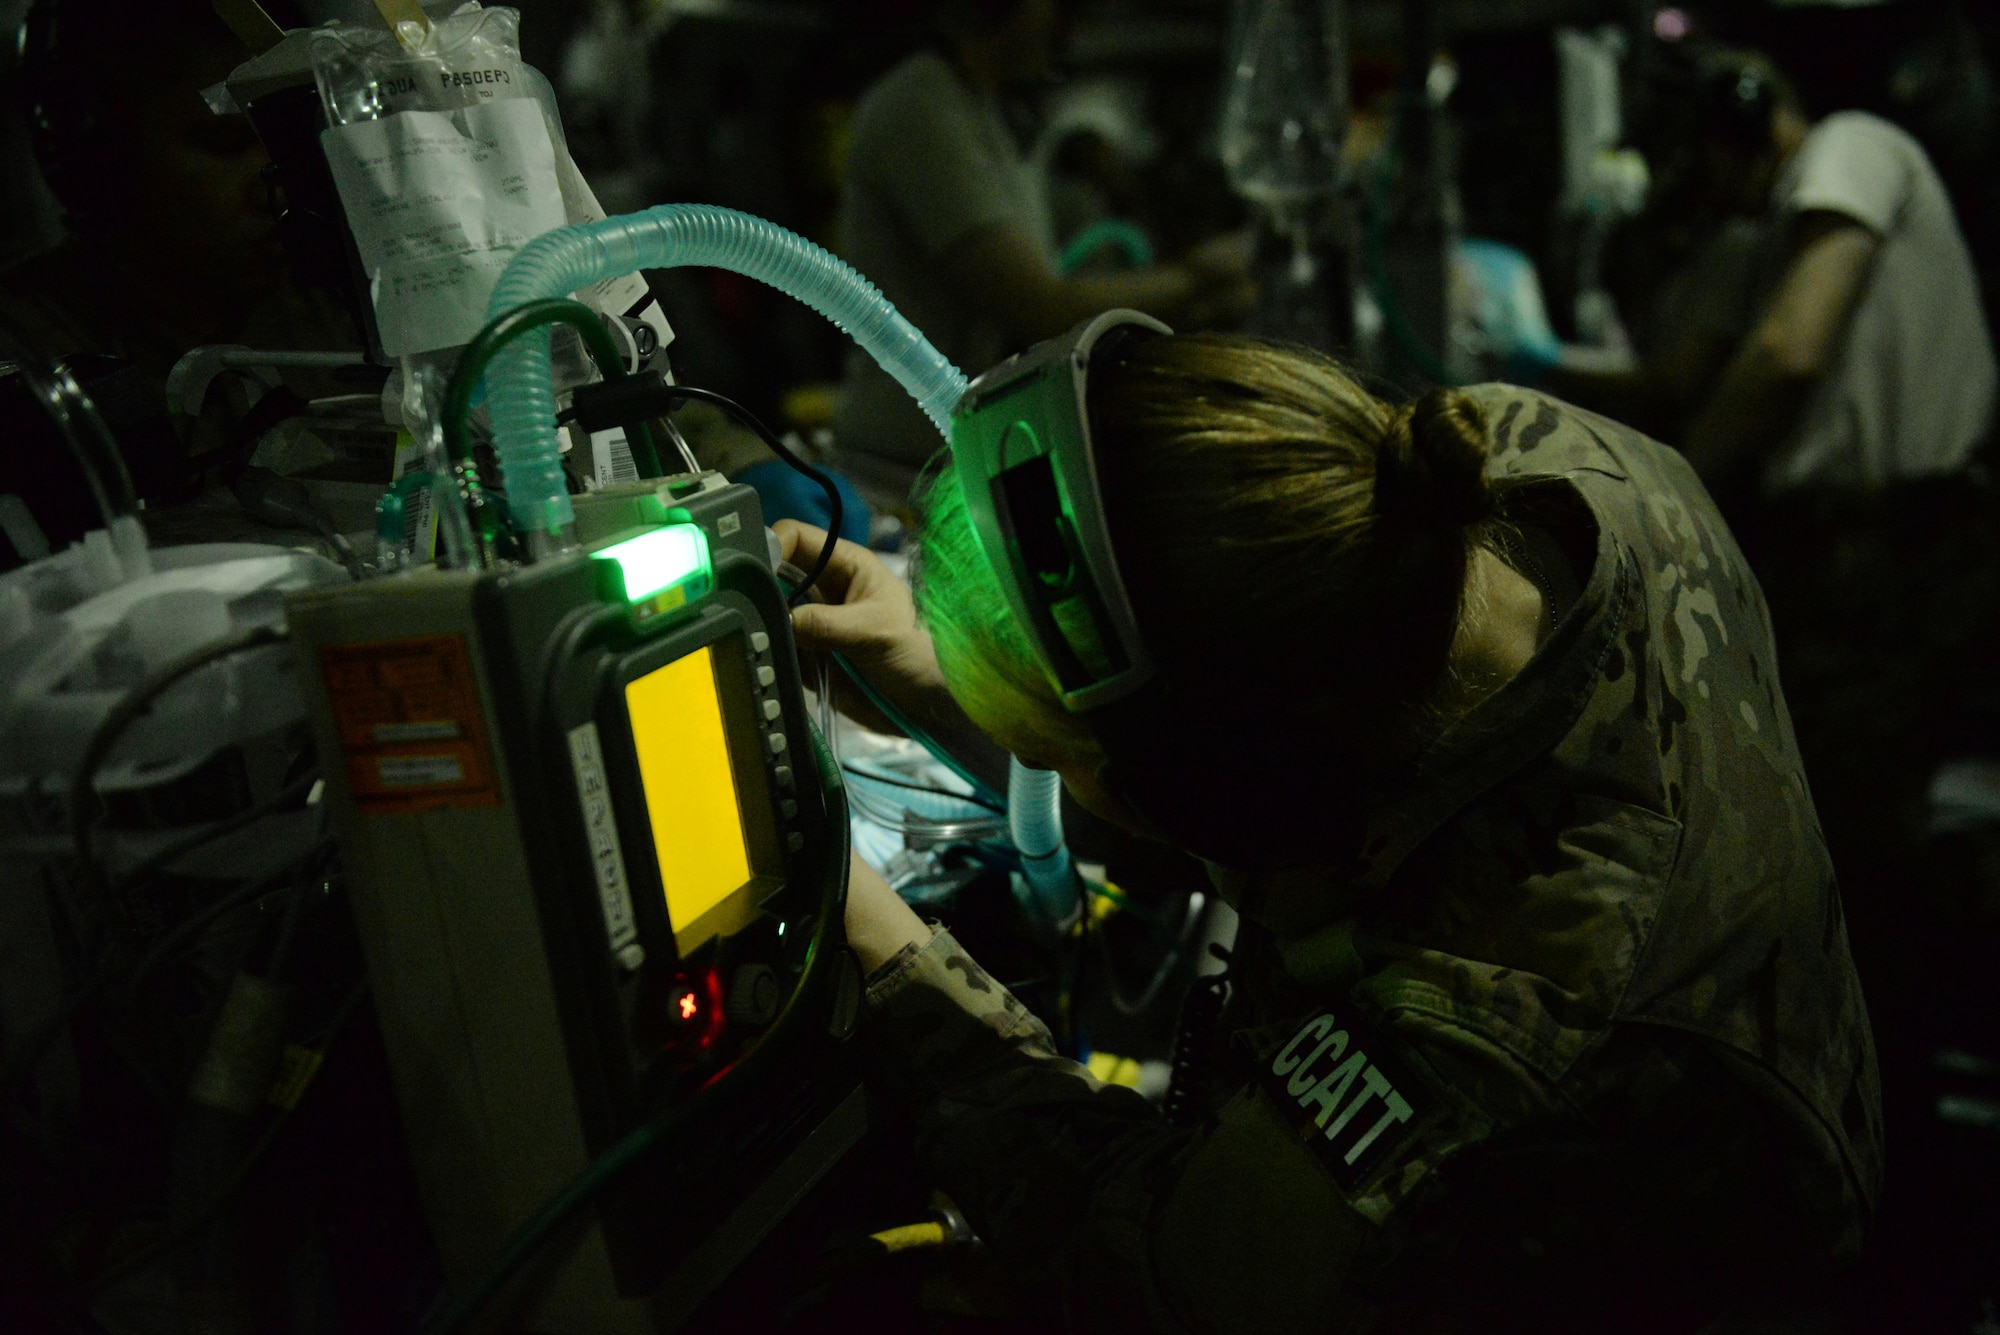 U.S. Air Force Capt. Deann Hoelscher, 455th Expeditionary Aeromedical Evacuation Squadron Critical Care Air Transport Team physician deployed from the 60th Medical Group at Travis Air Force Base, California, checks on a patient’s status during an aeromedical evacuation mission aboard a C-17 Globemaster III aircraft from Bagram Airfield, Afghanistan, to Ramstein Air Base, Germany, Aug. 9, 2015. The 455th EAES’ CCATT is a three-person, highly specialized medical team consisting of a physician who specializes in an area of critical care or emergency medicine, a critical care nurse and a respiratory therapist. The CCATT is charged with providing critical care to the sick and wounded as they are moved thousands of miles onboard U.S. cargo aircraft to receive full-time care elsewhere.  (U.S. Air Force photo by Maj. Tony Wickman)